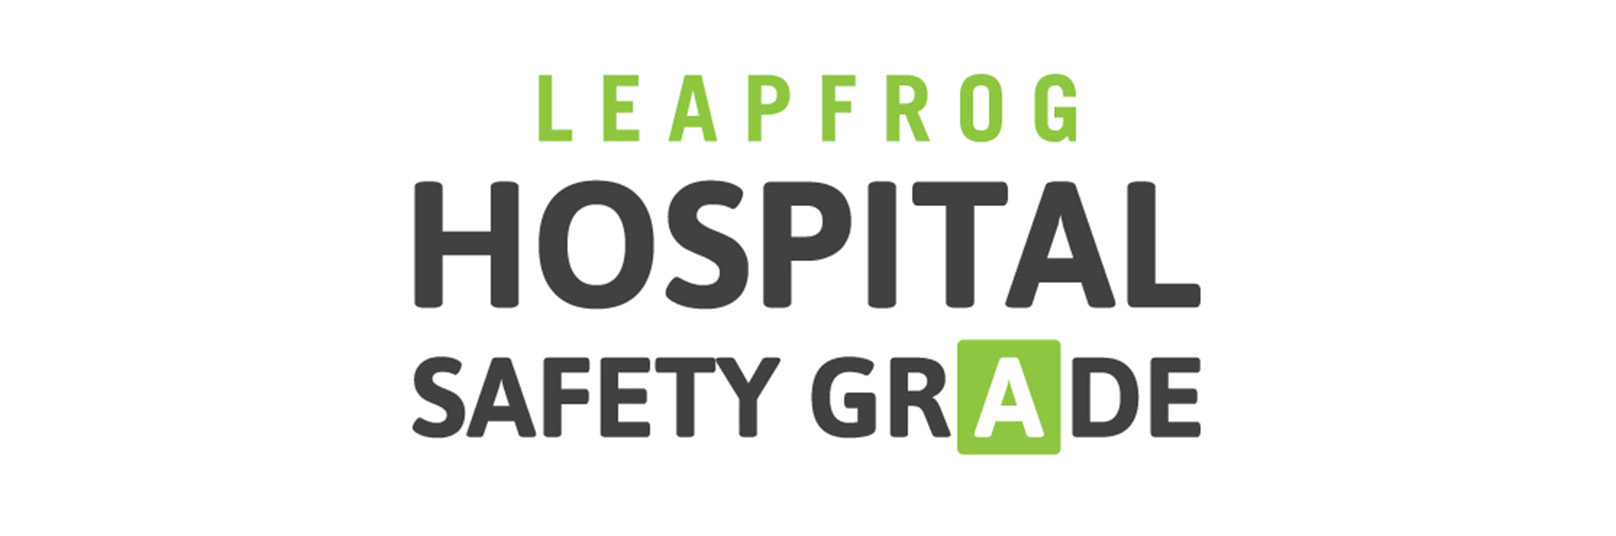 Chinese Hospital Receives an ‘A’ from The Leapfrog Group